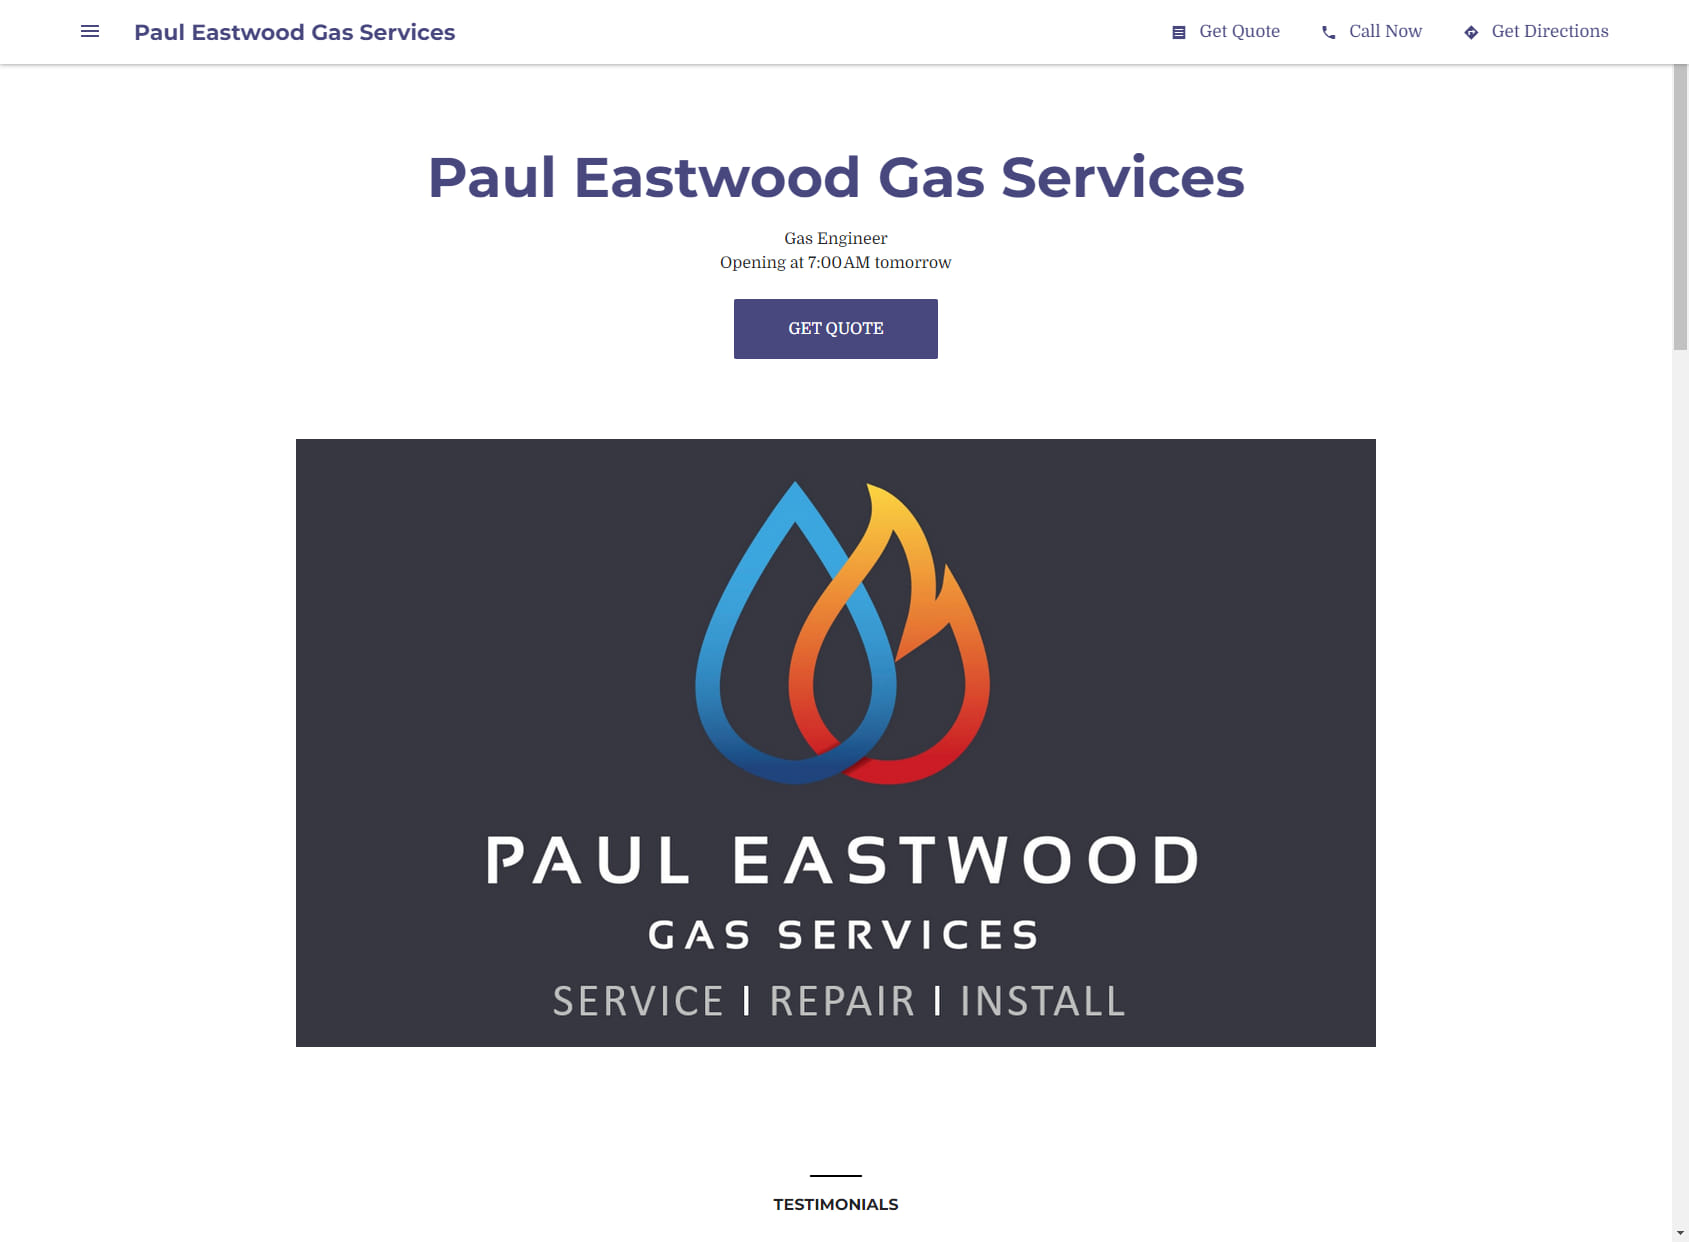 Paul Eastwood Gas Services